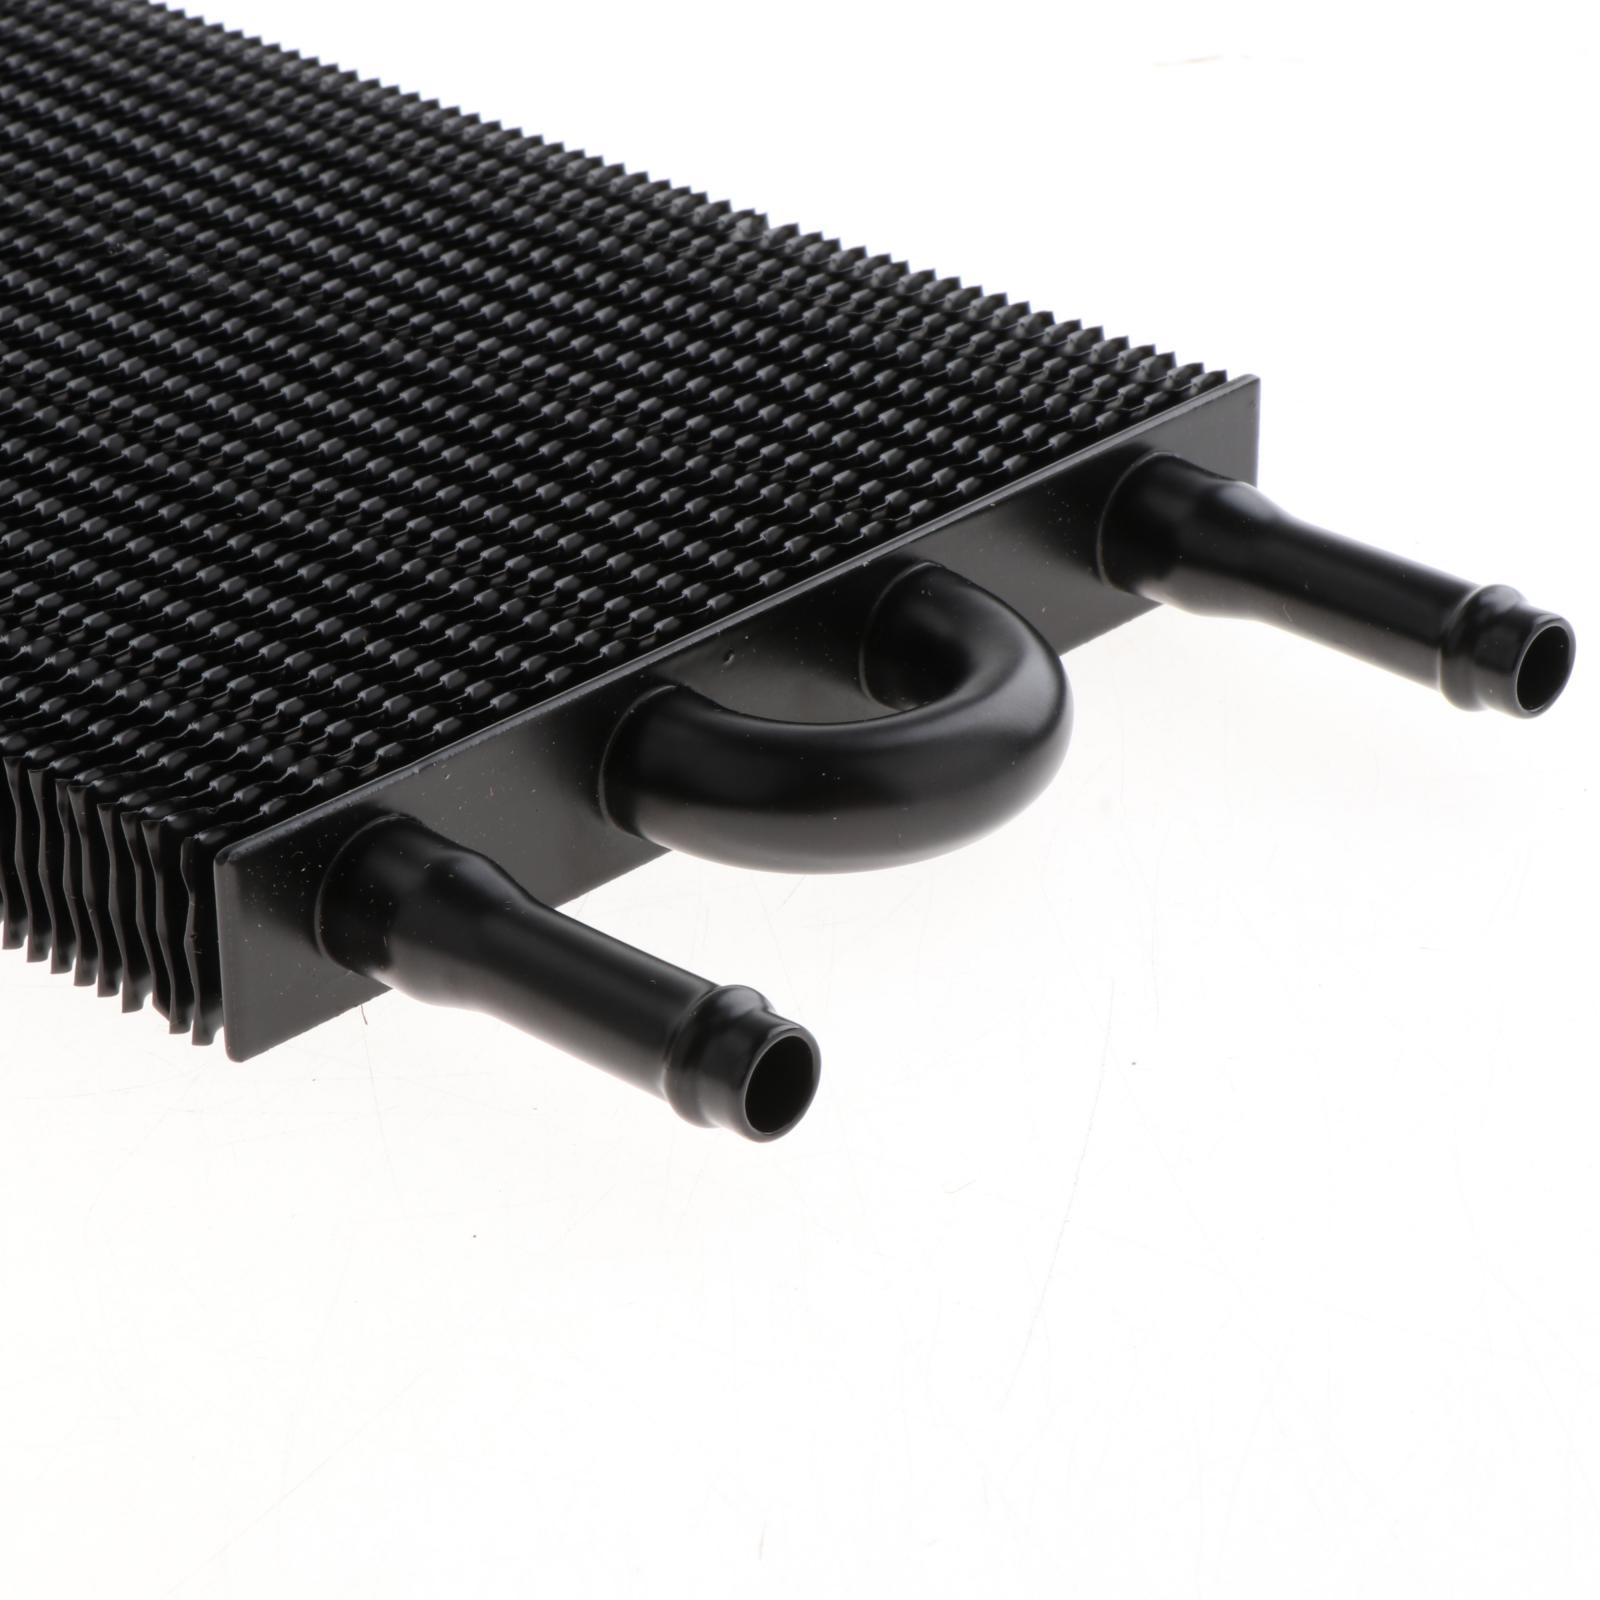 Universal Air Conditioner Condenser Set Corrosion Resistance High Strength Fits for Vehicles